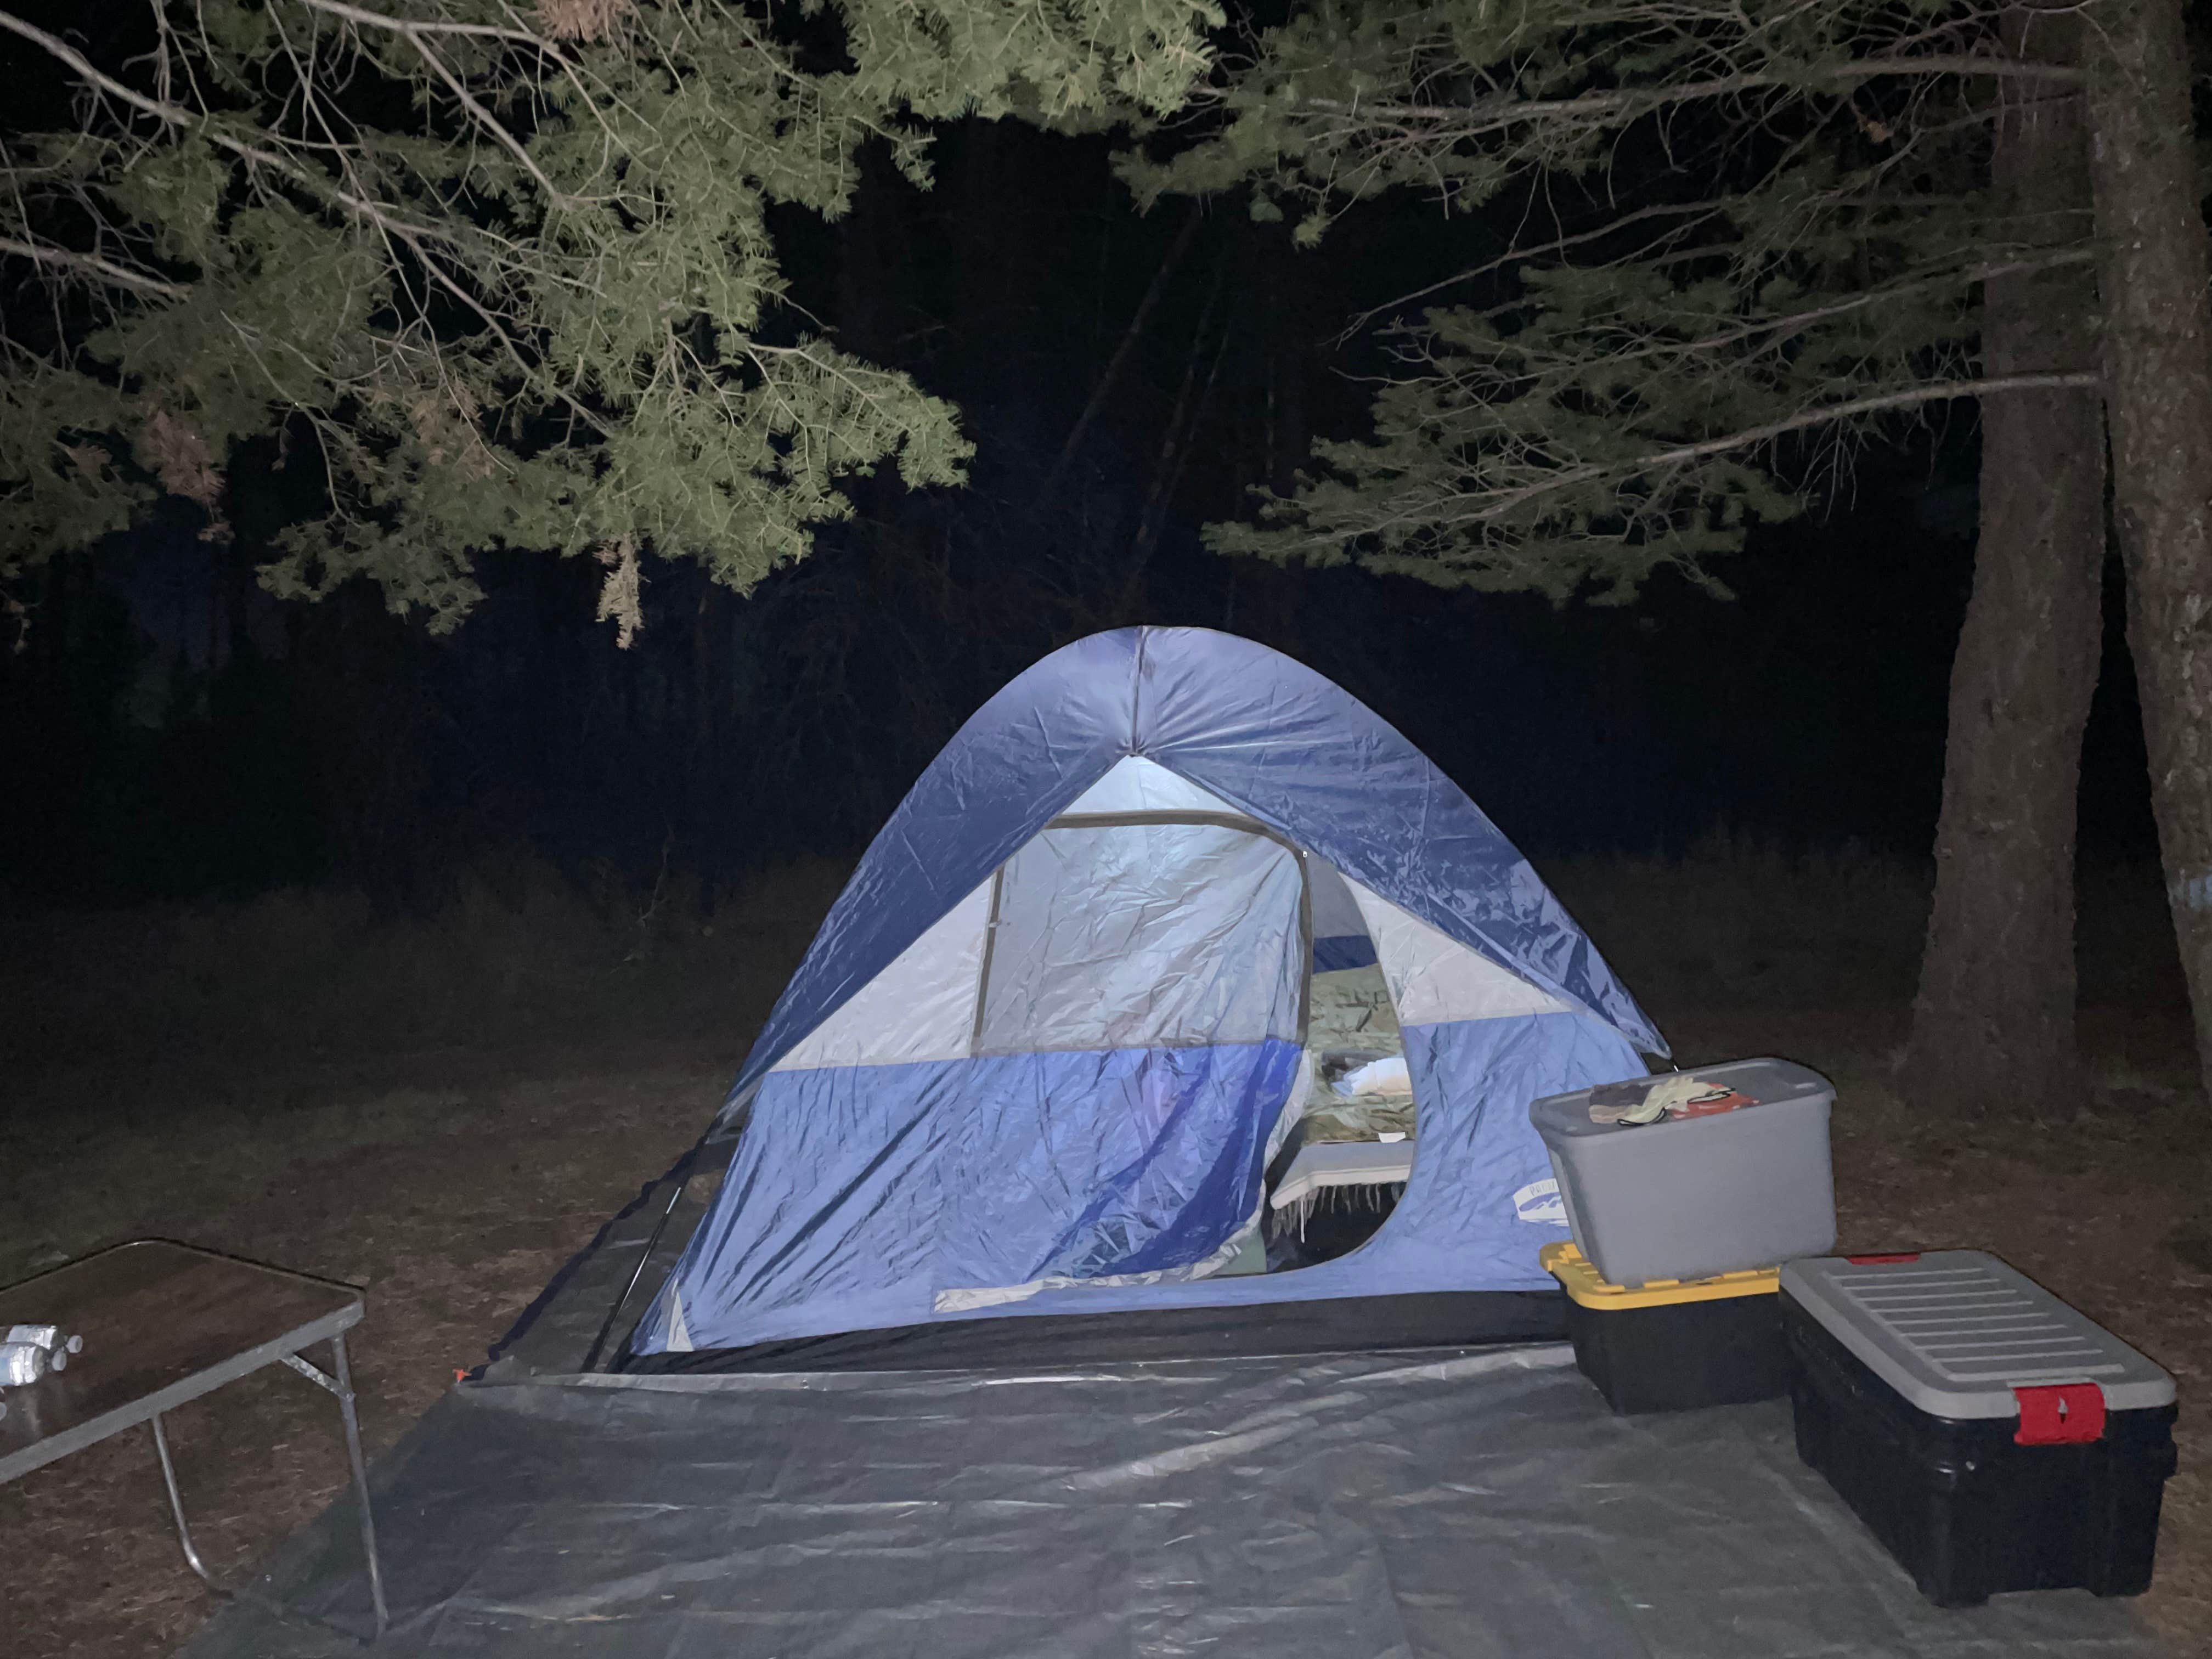 Camper submitted image from Amigos Loop Dispersed Site - 4